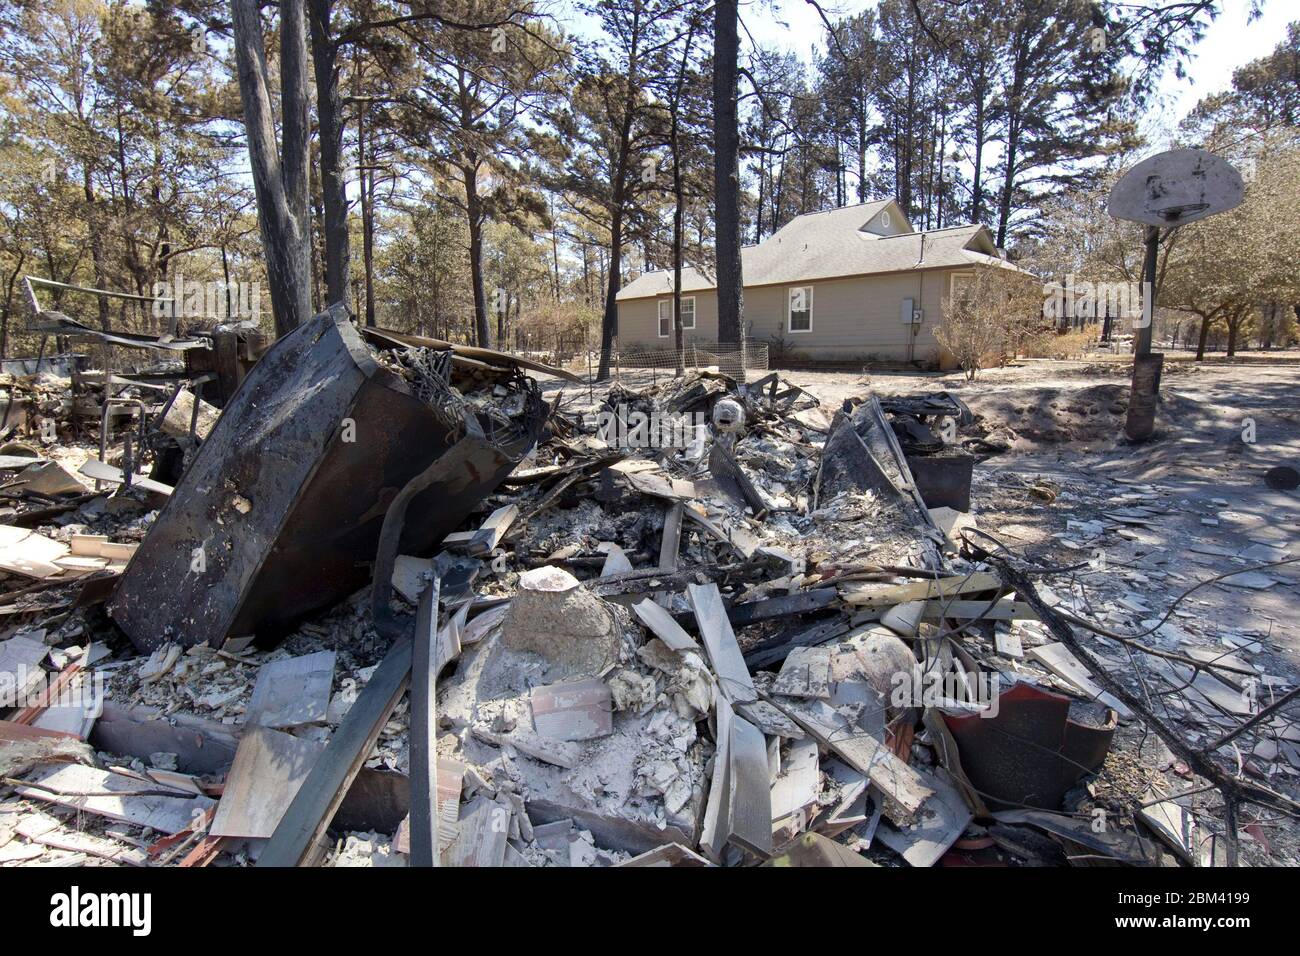 Bastrop County Texas USA, September 9, 2011: A home sits untouched while the garage next to it lies in ruins off Hwy 21  after wildfire raced through the piney woods in Bastrop County 30 miles east of Austin. The fires destroyed 1,400 houses and scorched over 38,000 acres while it raged out of control for five days.  ©Bob Daemmrich Stock Photo